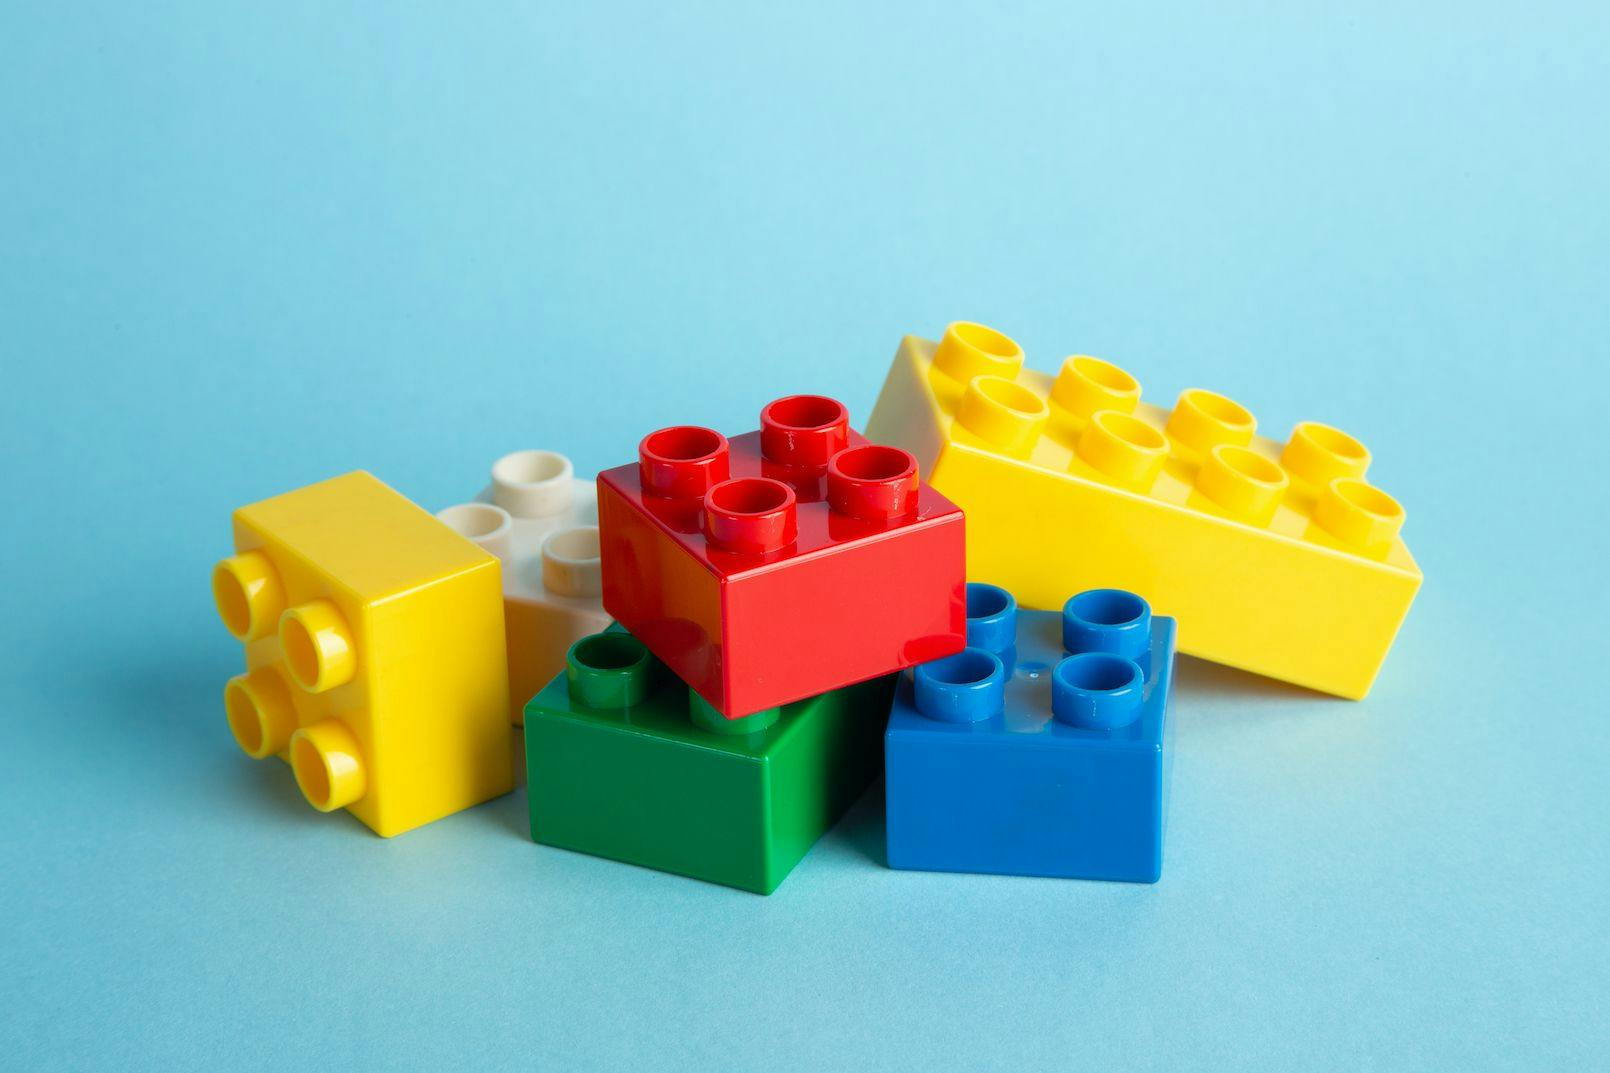 What are the wonderful wellbeing benefits of Lego play as an adult?